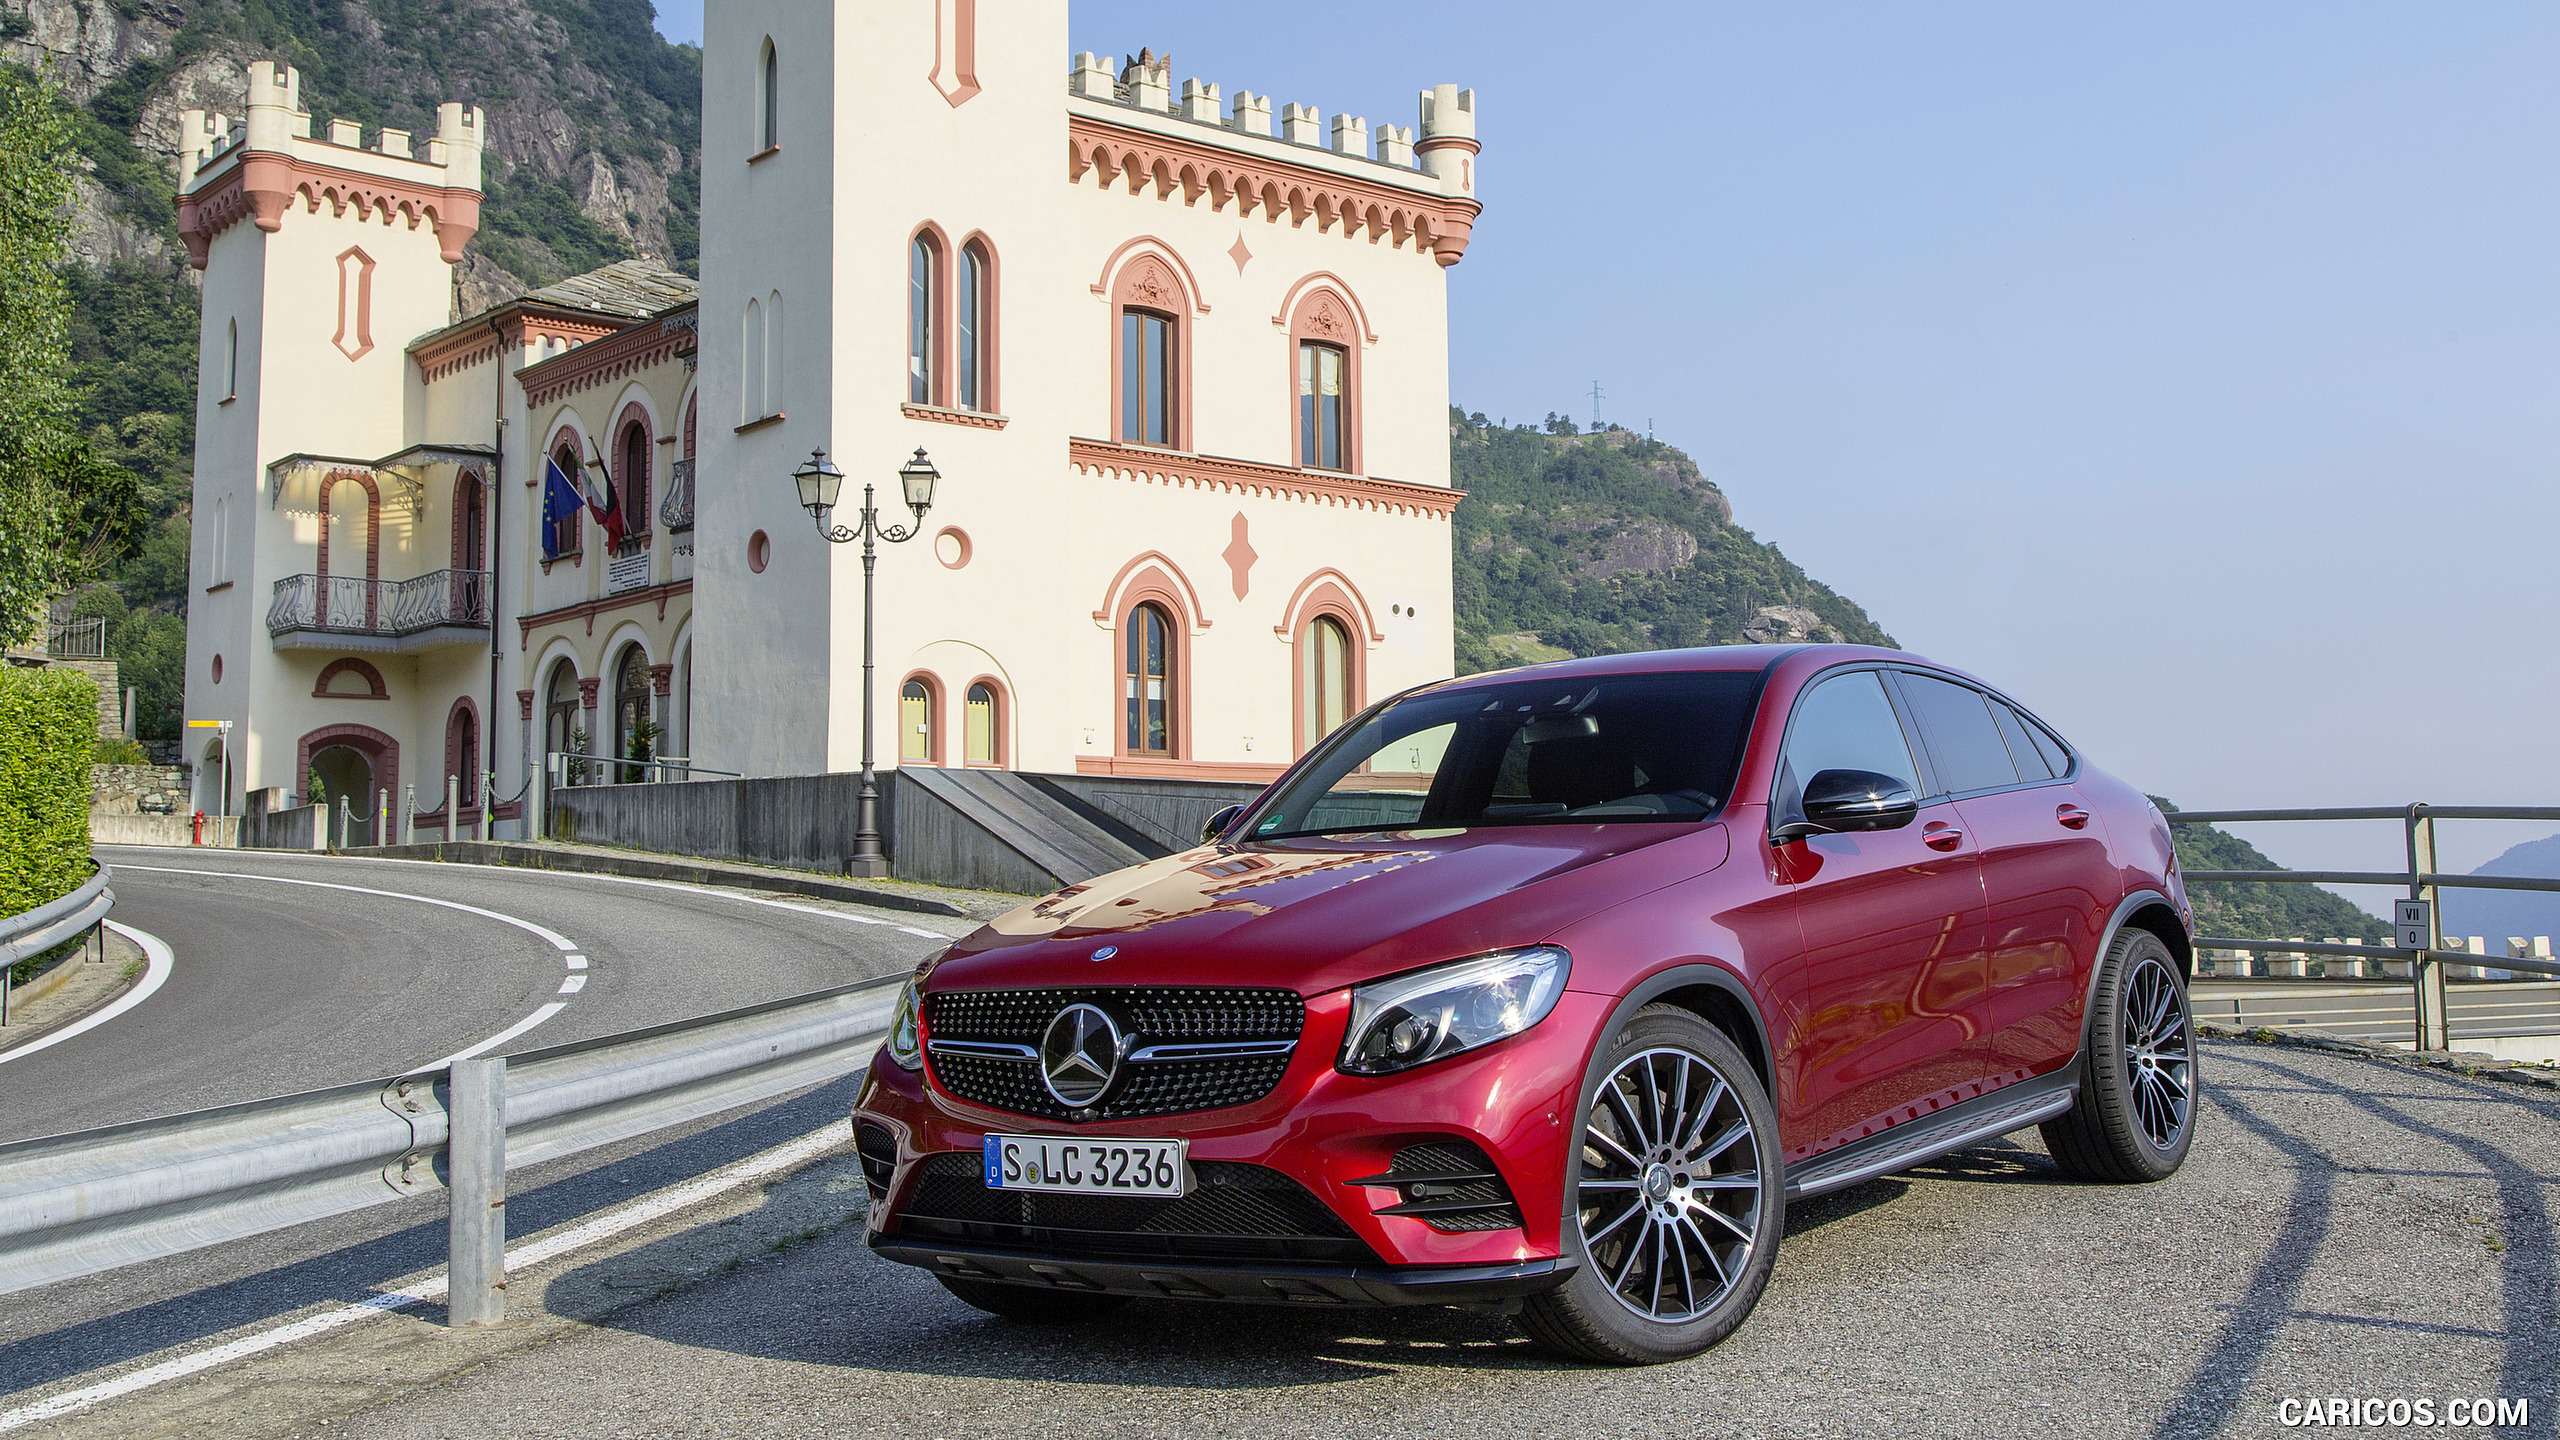 2017 Mercedes-Benz GLC 350 d Coupe (Diesel; Color: Hyacinth Red) - Front Three-Quarter, #78 of 144